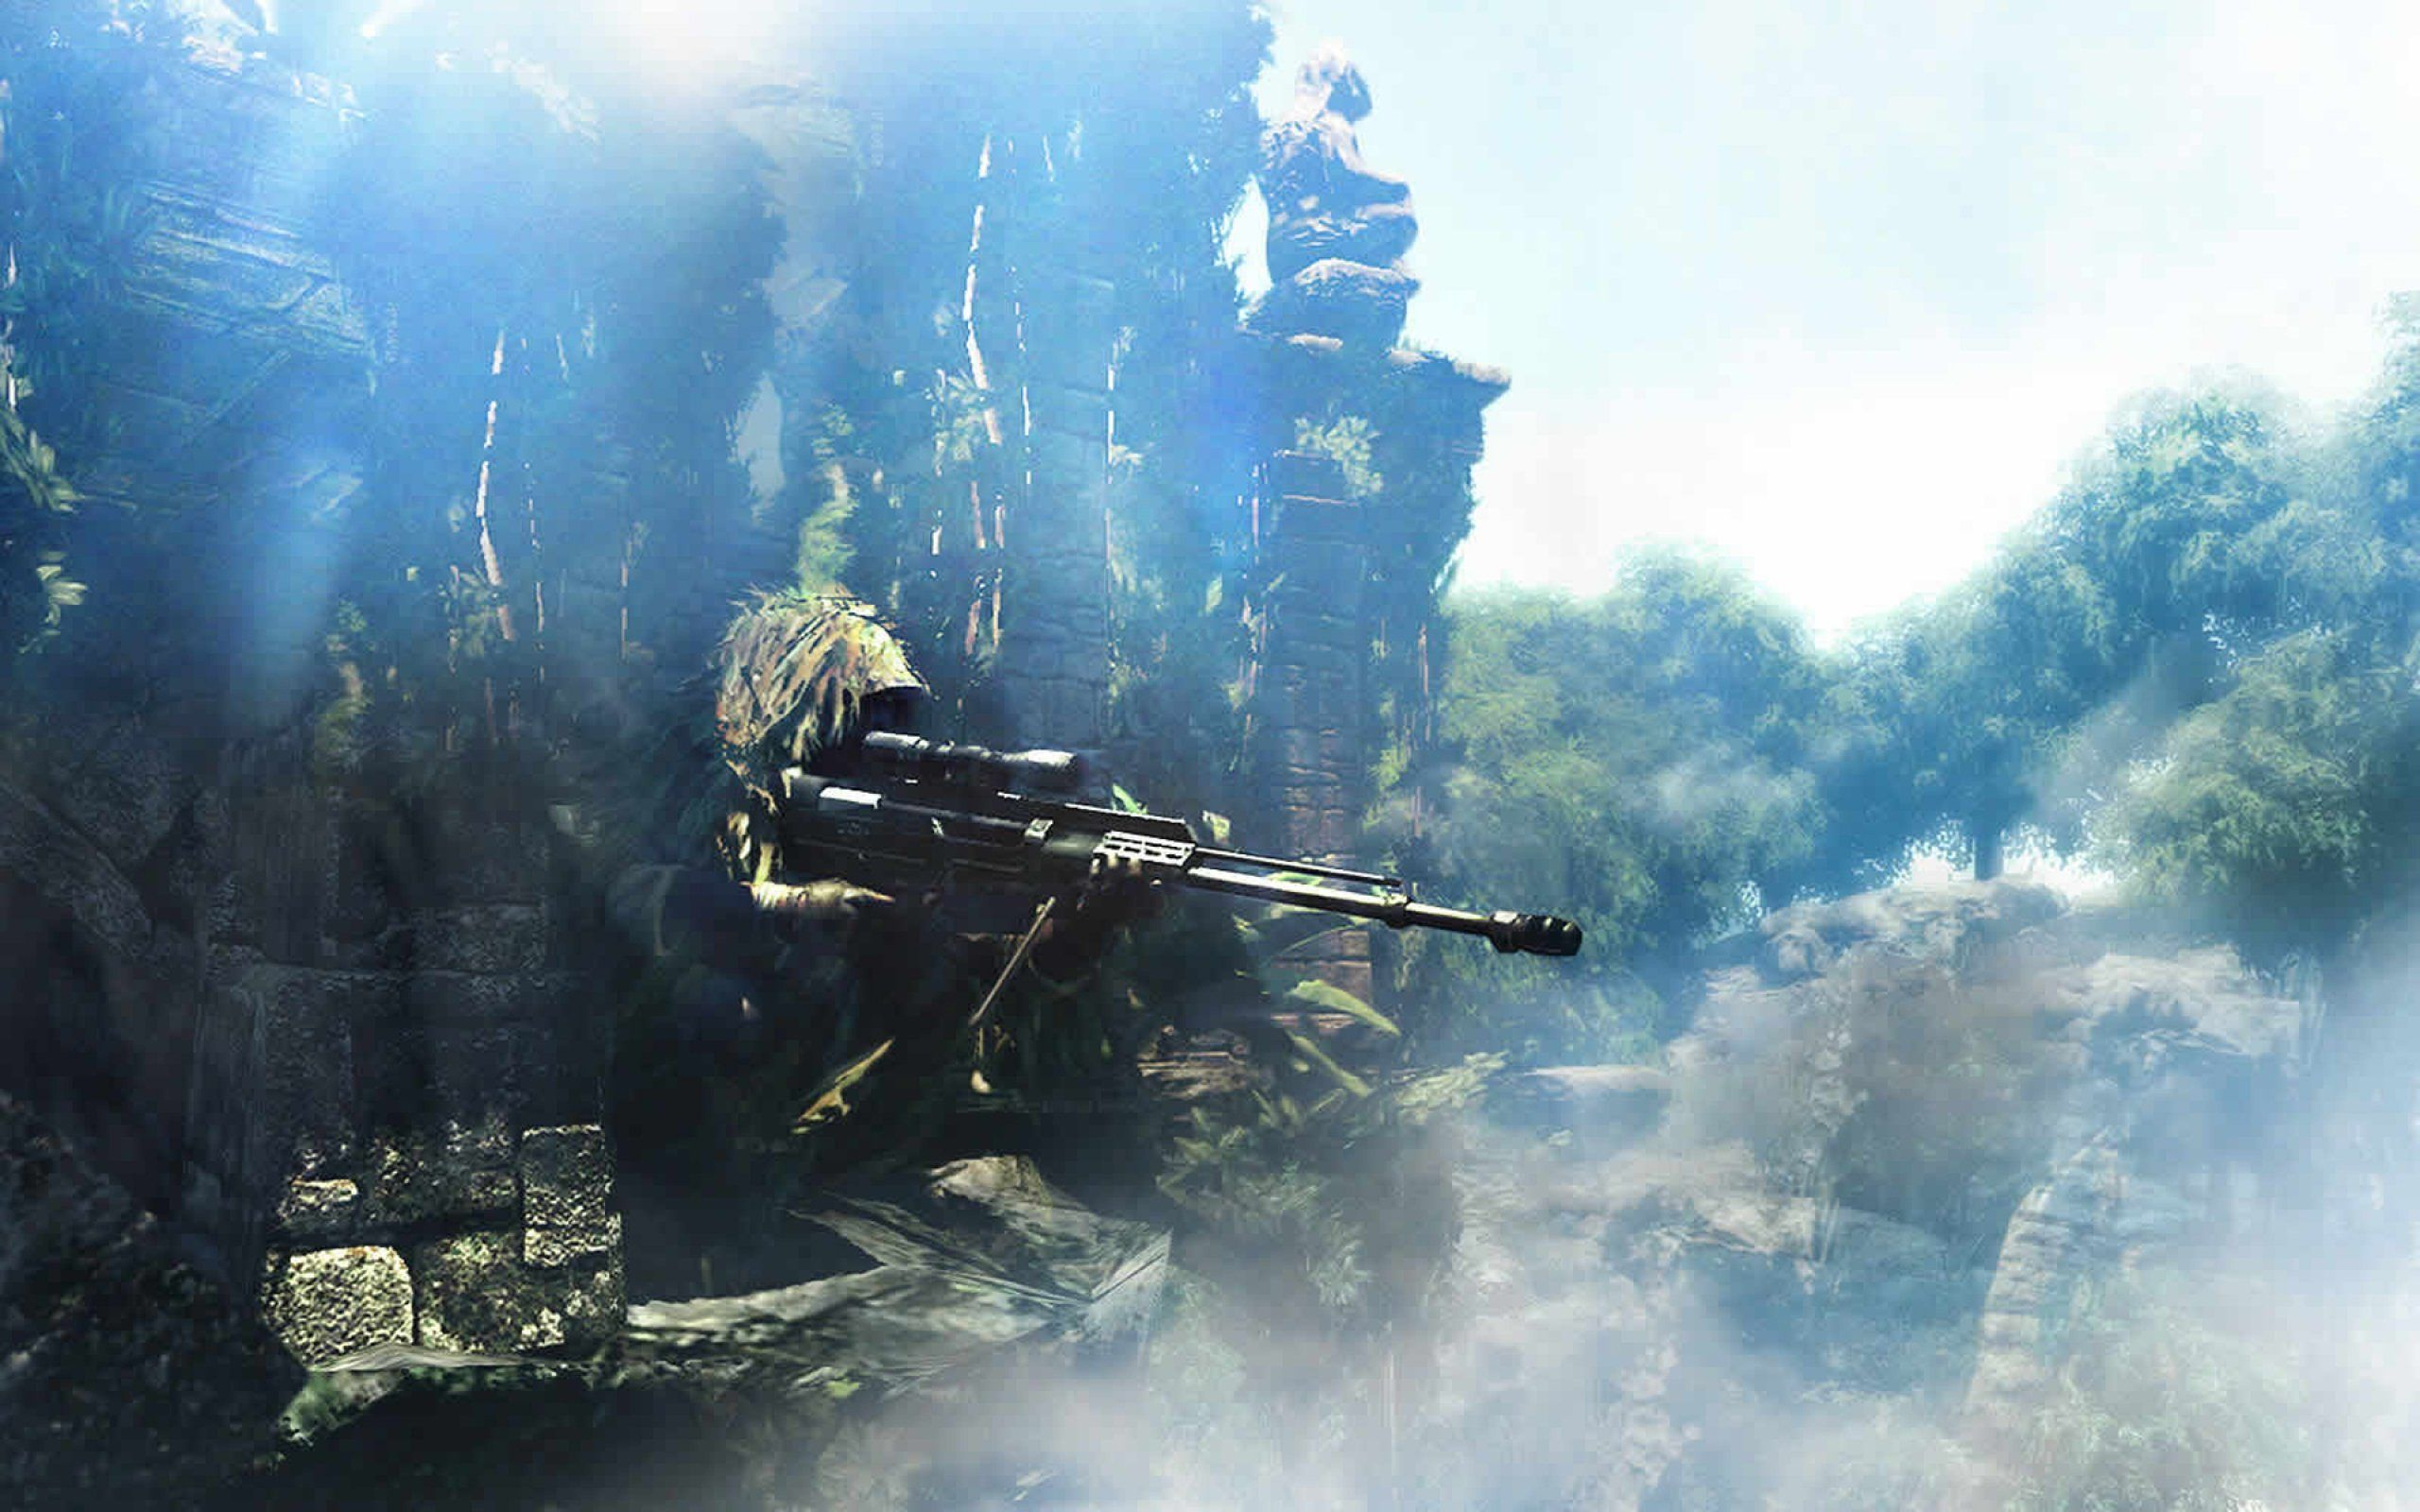 2560x1600 Sniper: Ghost Warrior 3 Wallpaper For Android | Sniper, Warrior, Ghost soldiers